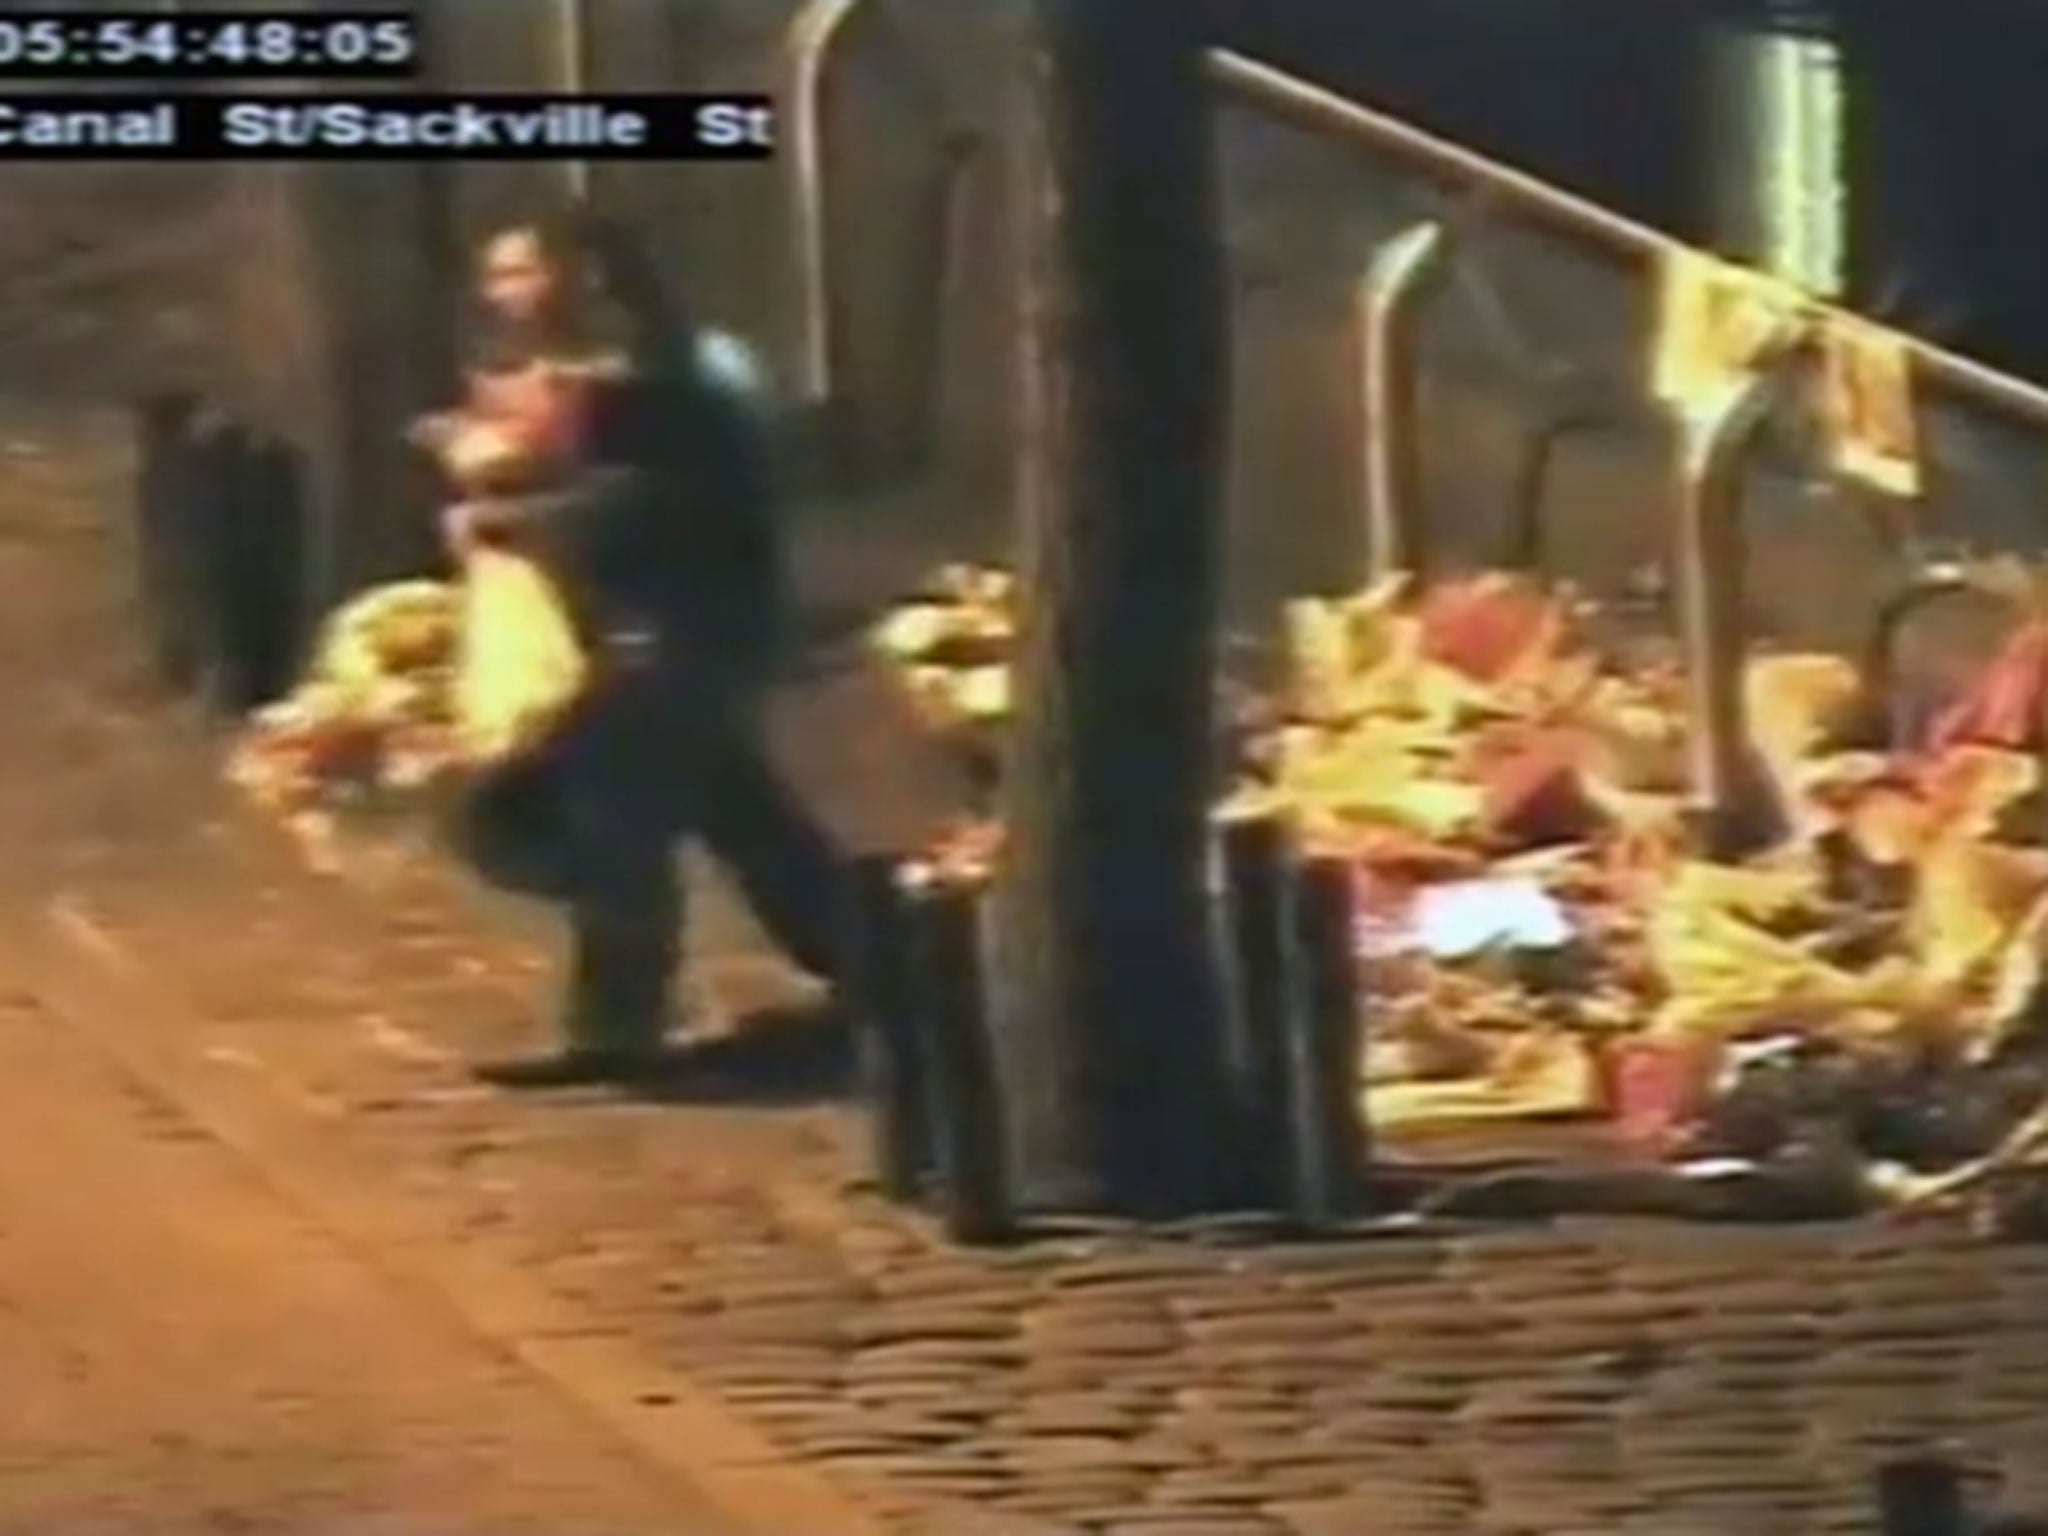 The man was captured on CCTV stealing flowers from the site